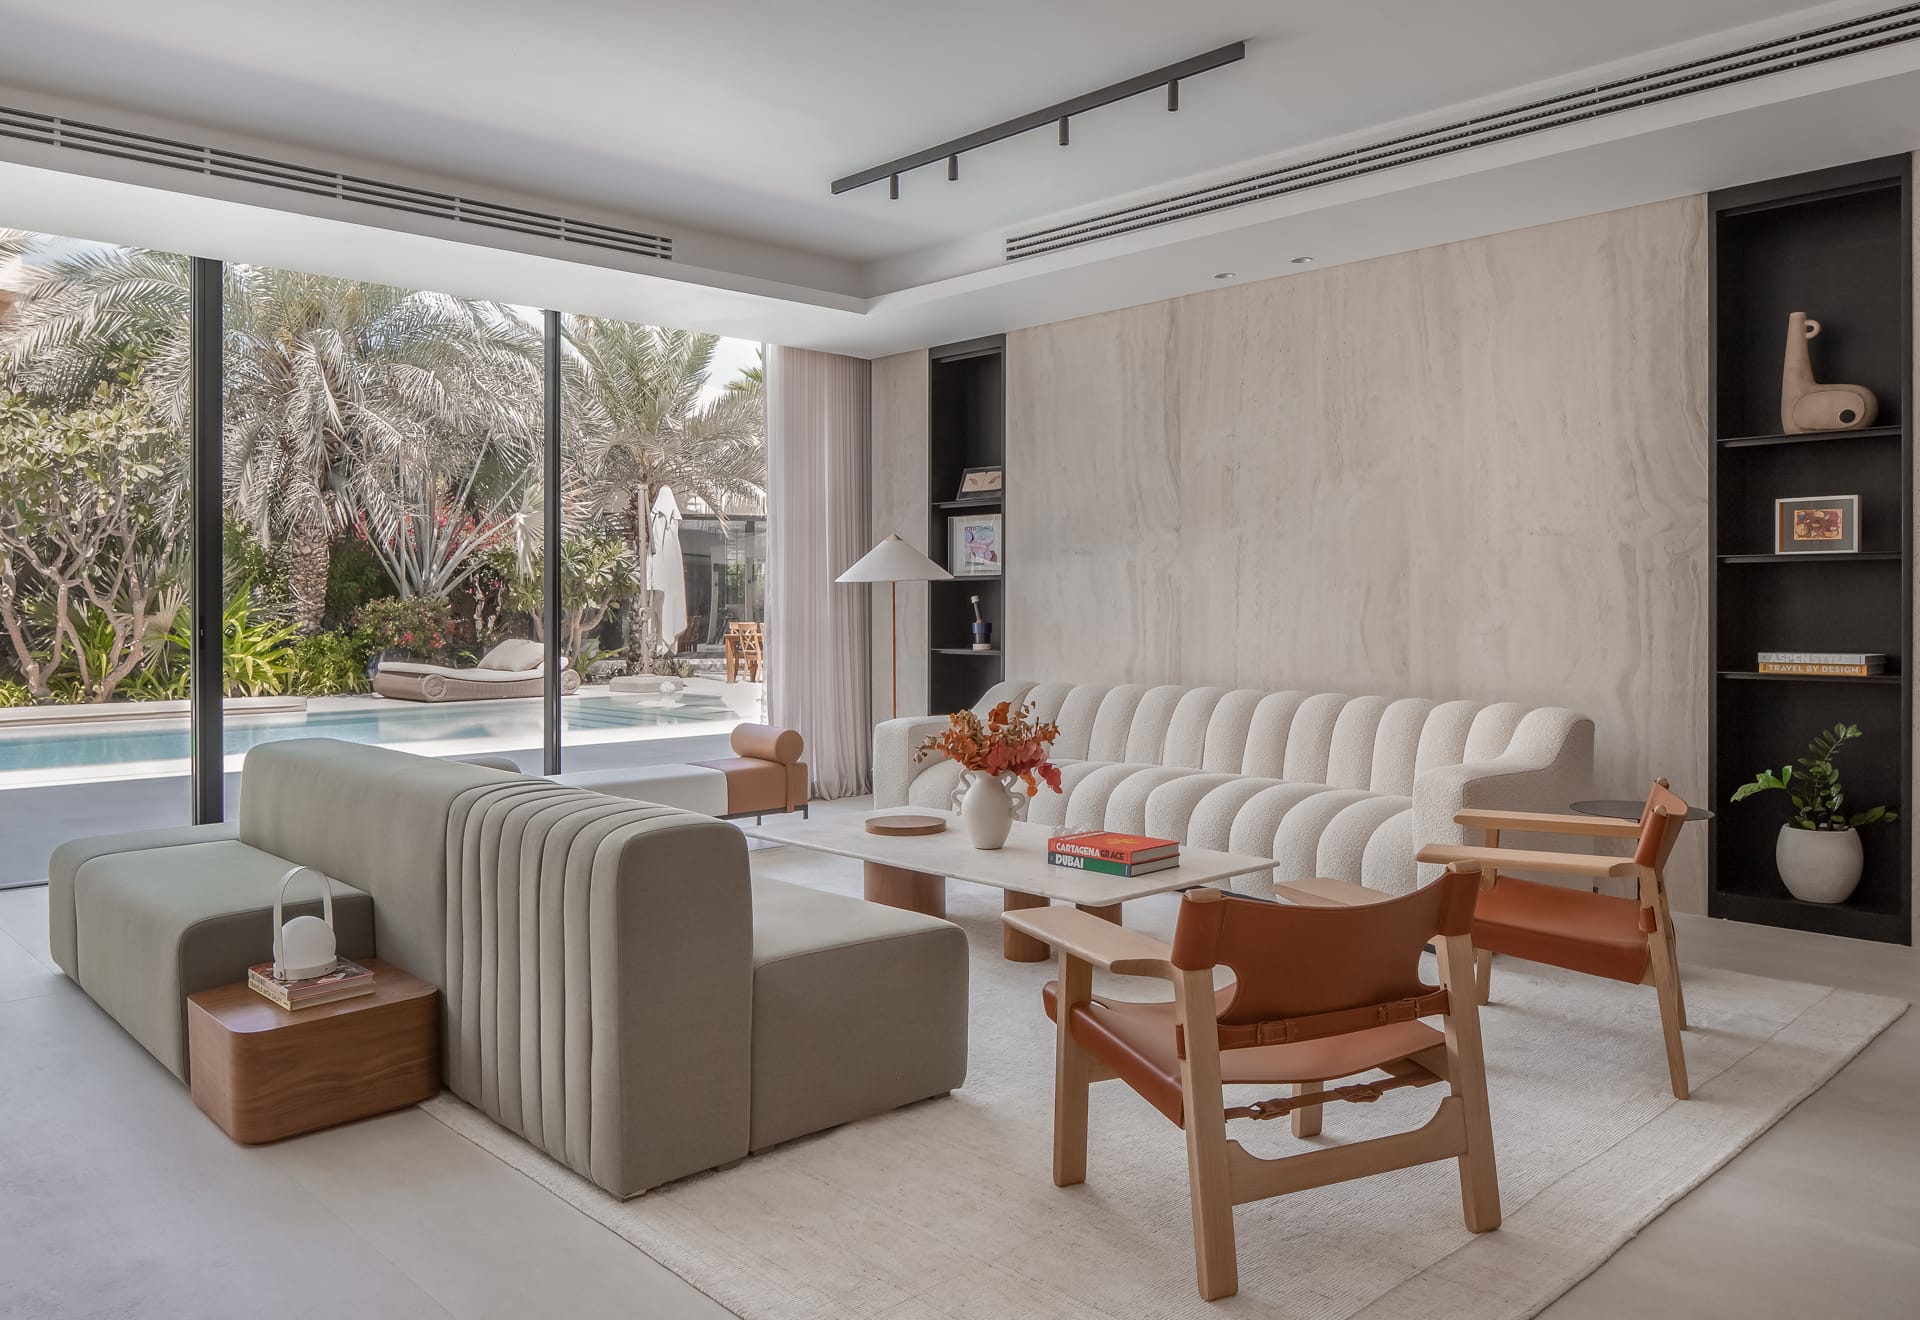 Smart Renovation in Dubai: Your Partner for Full Home Fit-Outs